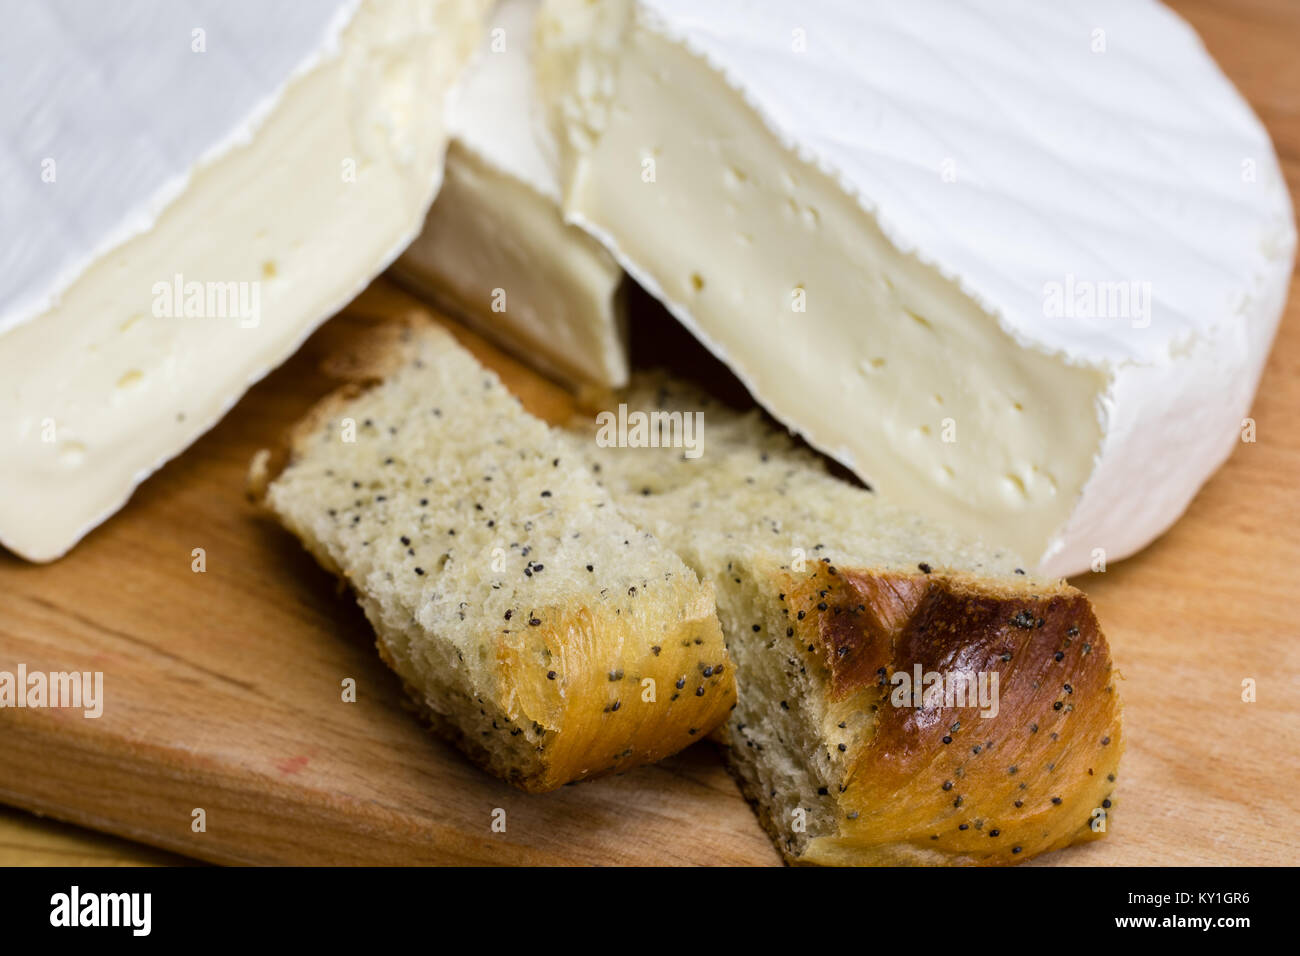 Fresh pastry with poppy seeds excellently paired with Camembert cheese brie . Stock Photo